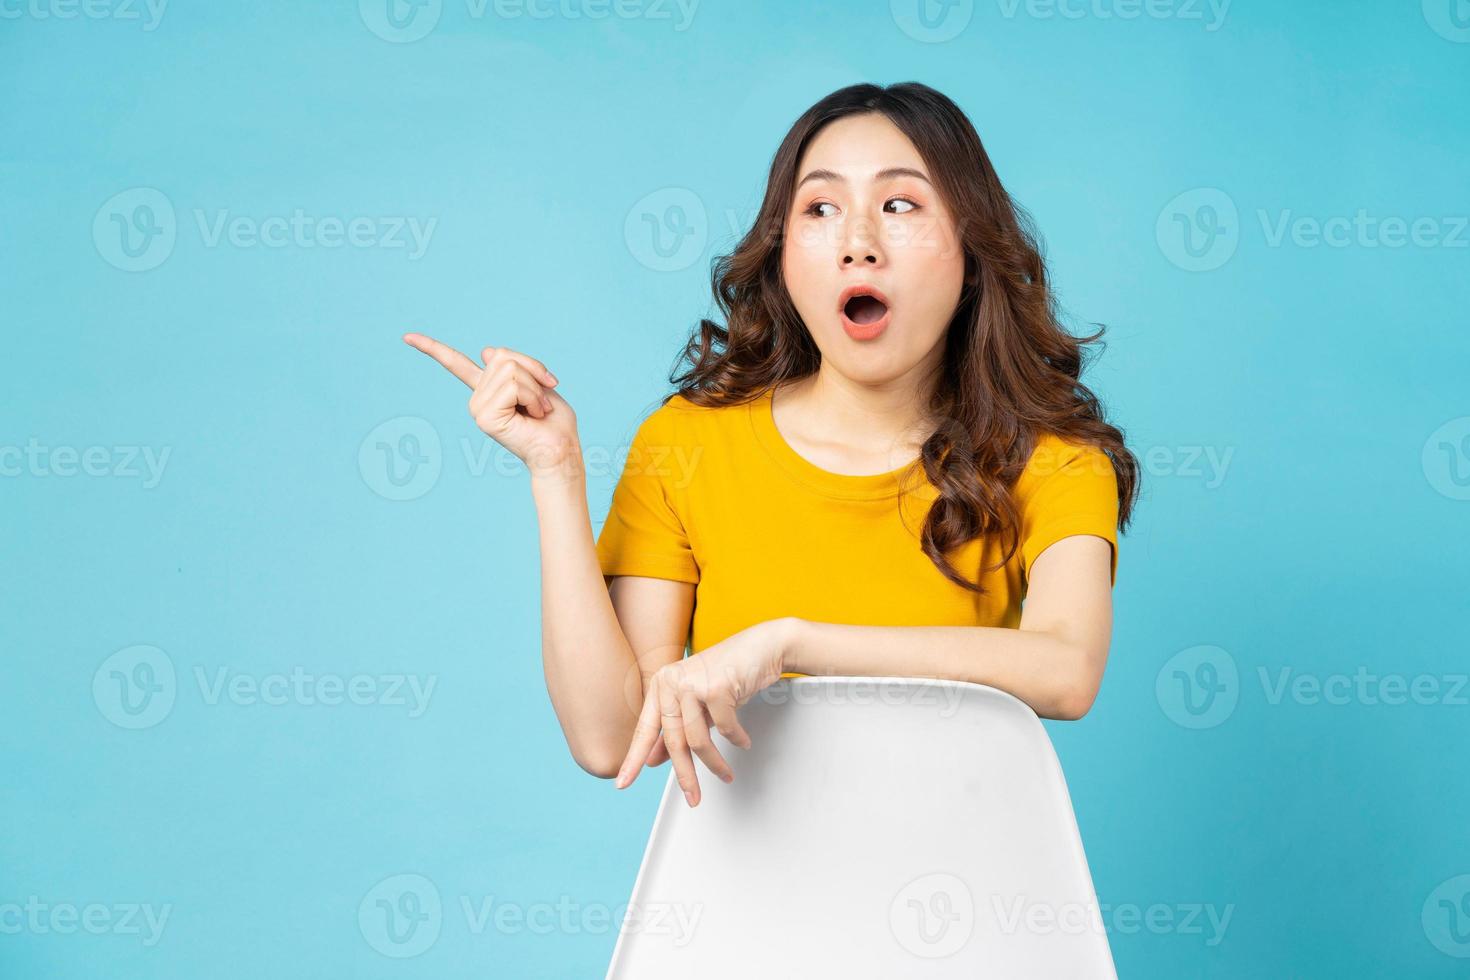 Young girl sitting in chair with gesture and expression on background photo